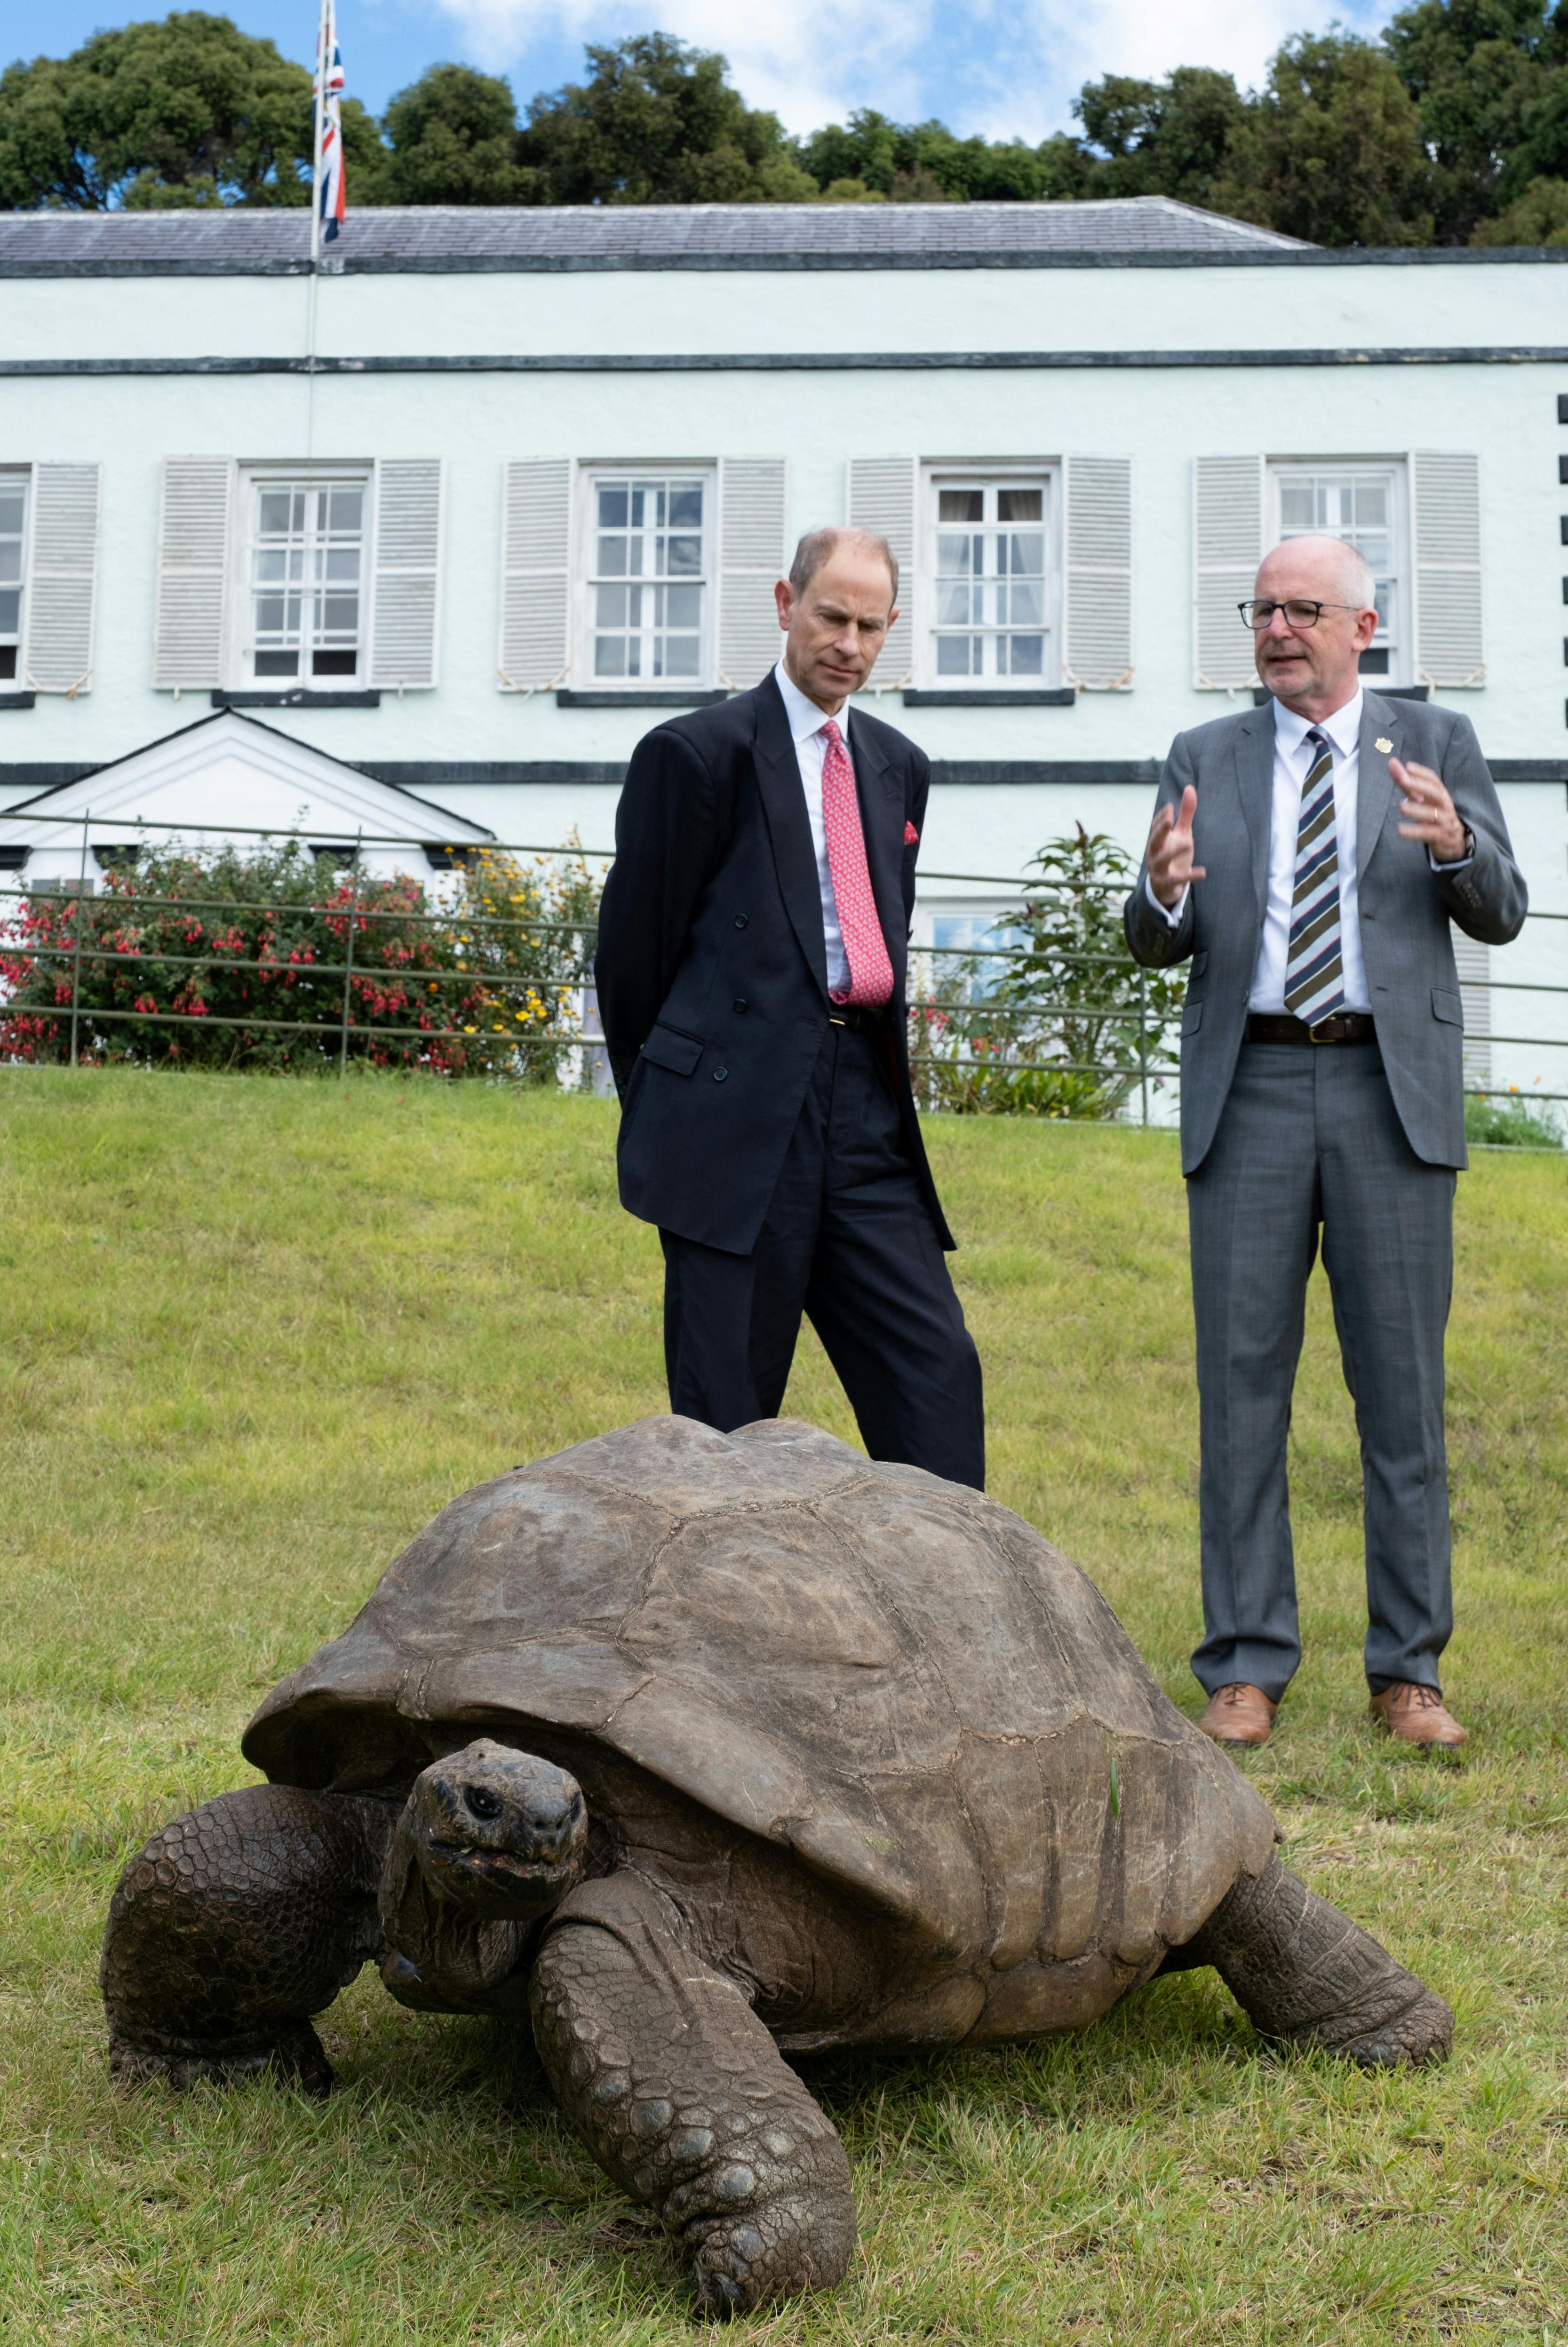 Britain's Prince Edward, Duke of Edinburgh meets the world's oldest living land animal, Jonathan the 191-year-old giant tortoise, on the South Atlantic island of Saint Helena, January 24, 2024. Buckingham Palace/Handout via REUTERS THIS IMAGE HAS BEEN SUPPLIED BY A THIRD PARTY. MANDATORY CREDIT.NO RESALES.NO ARCHIVES. REUSE OF THE PICTURE MAY REQUIRE FURTHER PERMISSION FROM THE COPYRIGHT HOLDER.